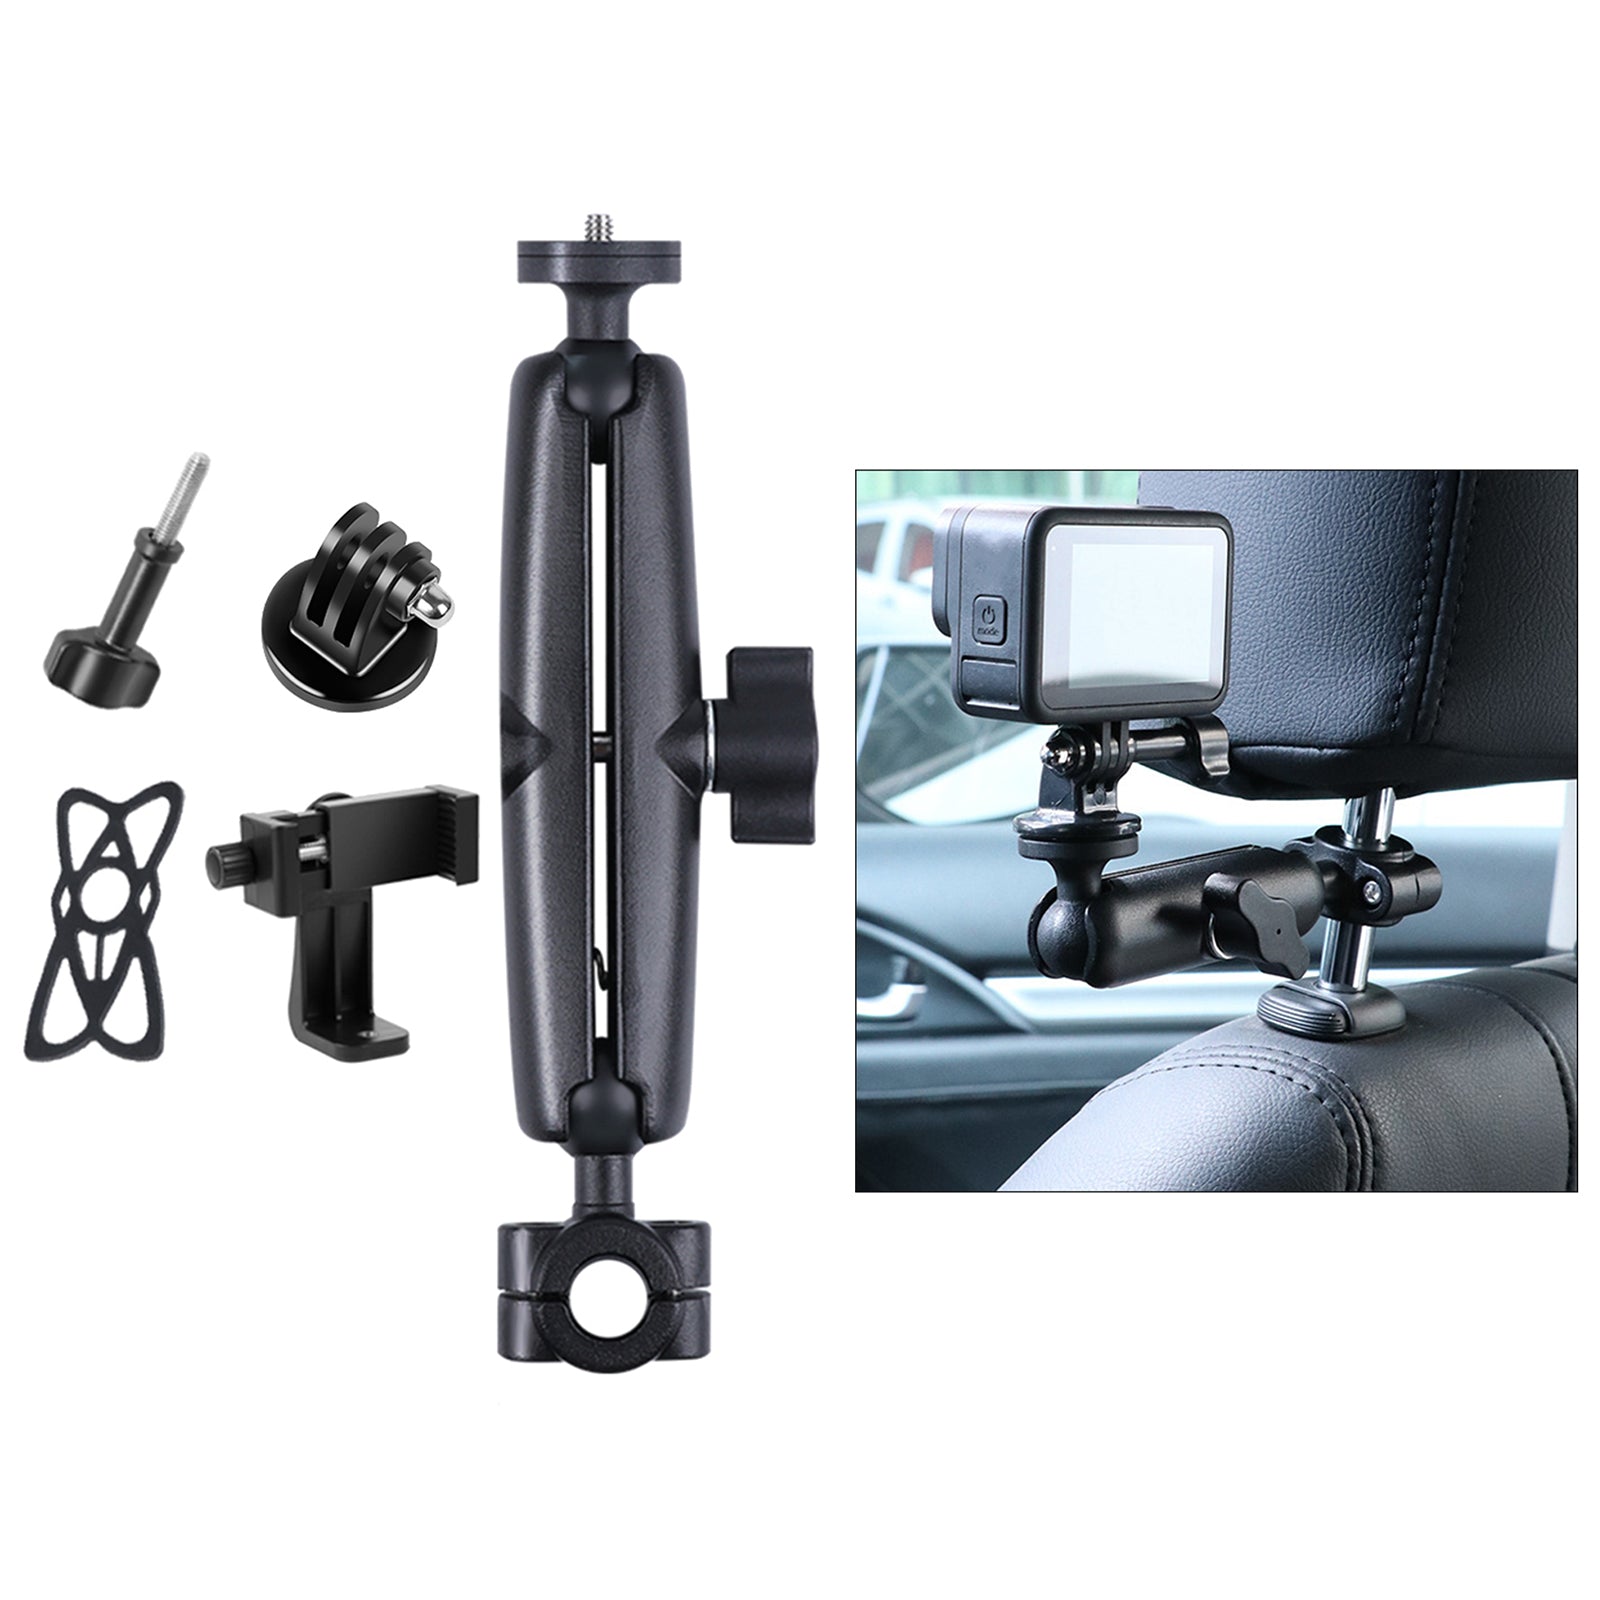 Car Back Seat Holder Mount for iPad Cell Phone Accessories Black 22x4cm